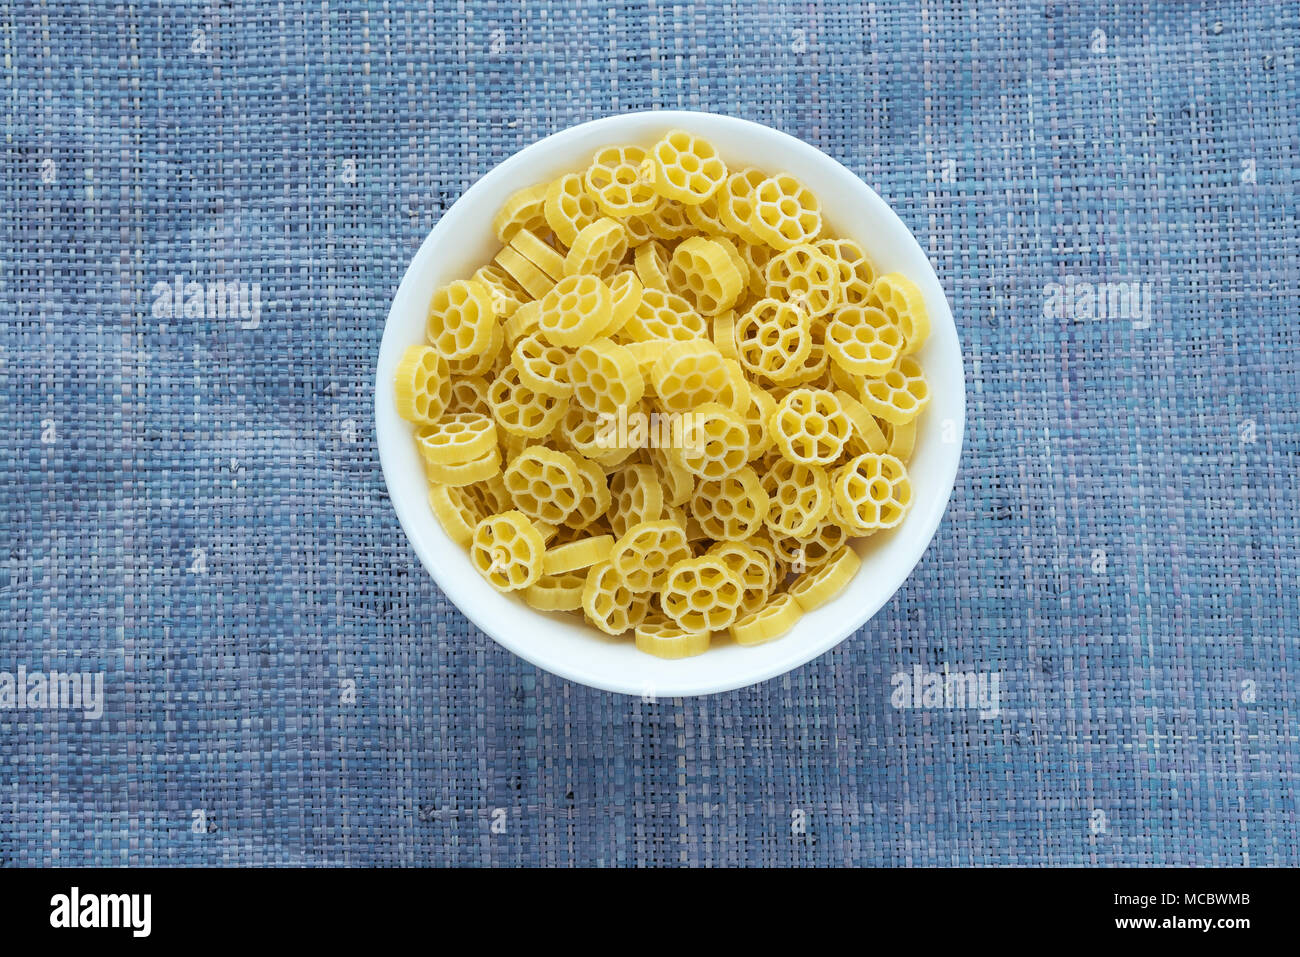 Macaroni ruote Pasta in a white cup on a blue knitted background in the center. Close-up with the top. Stock Photo